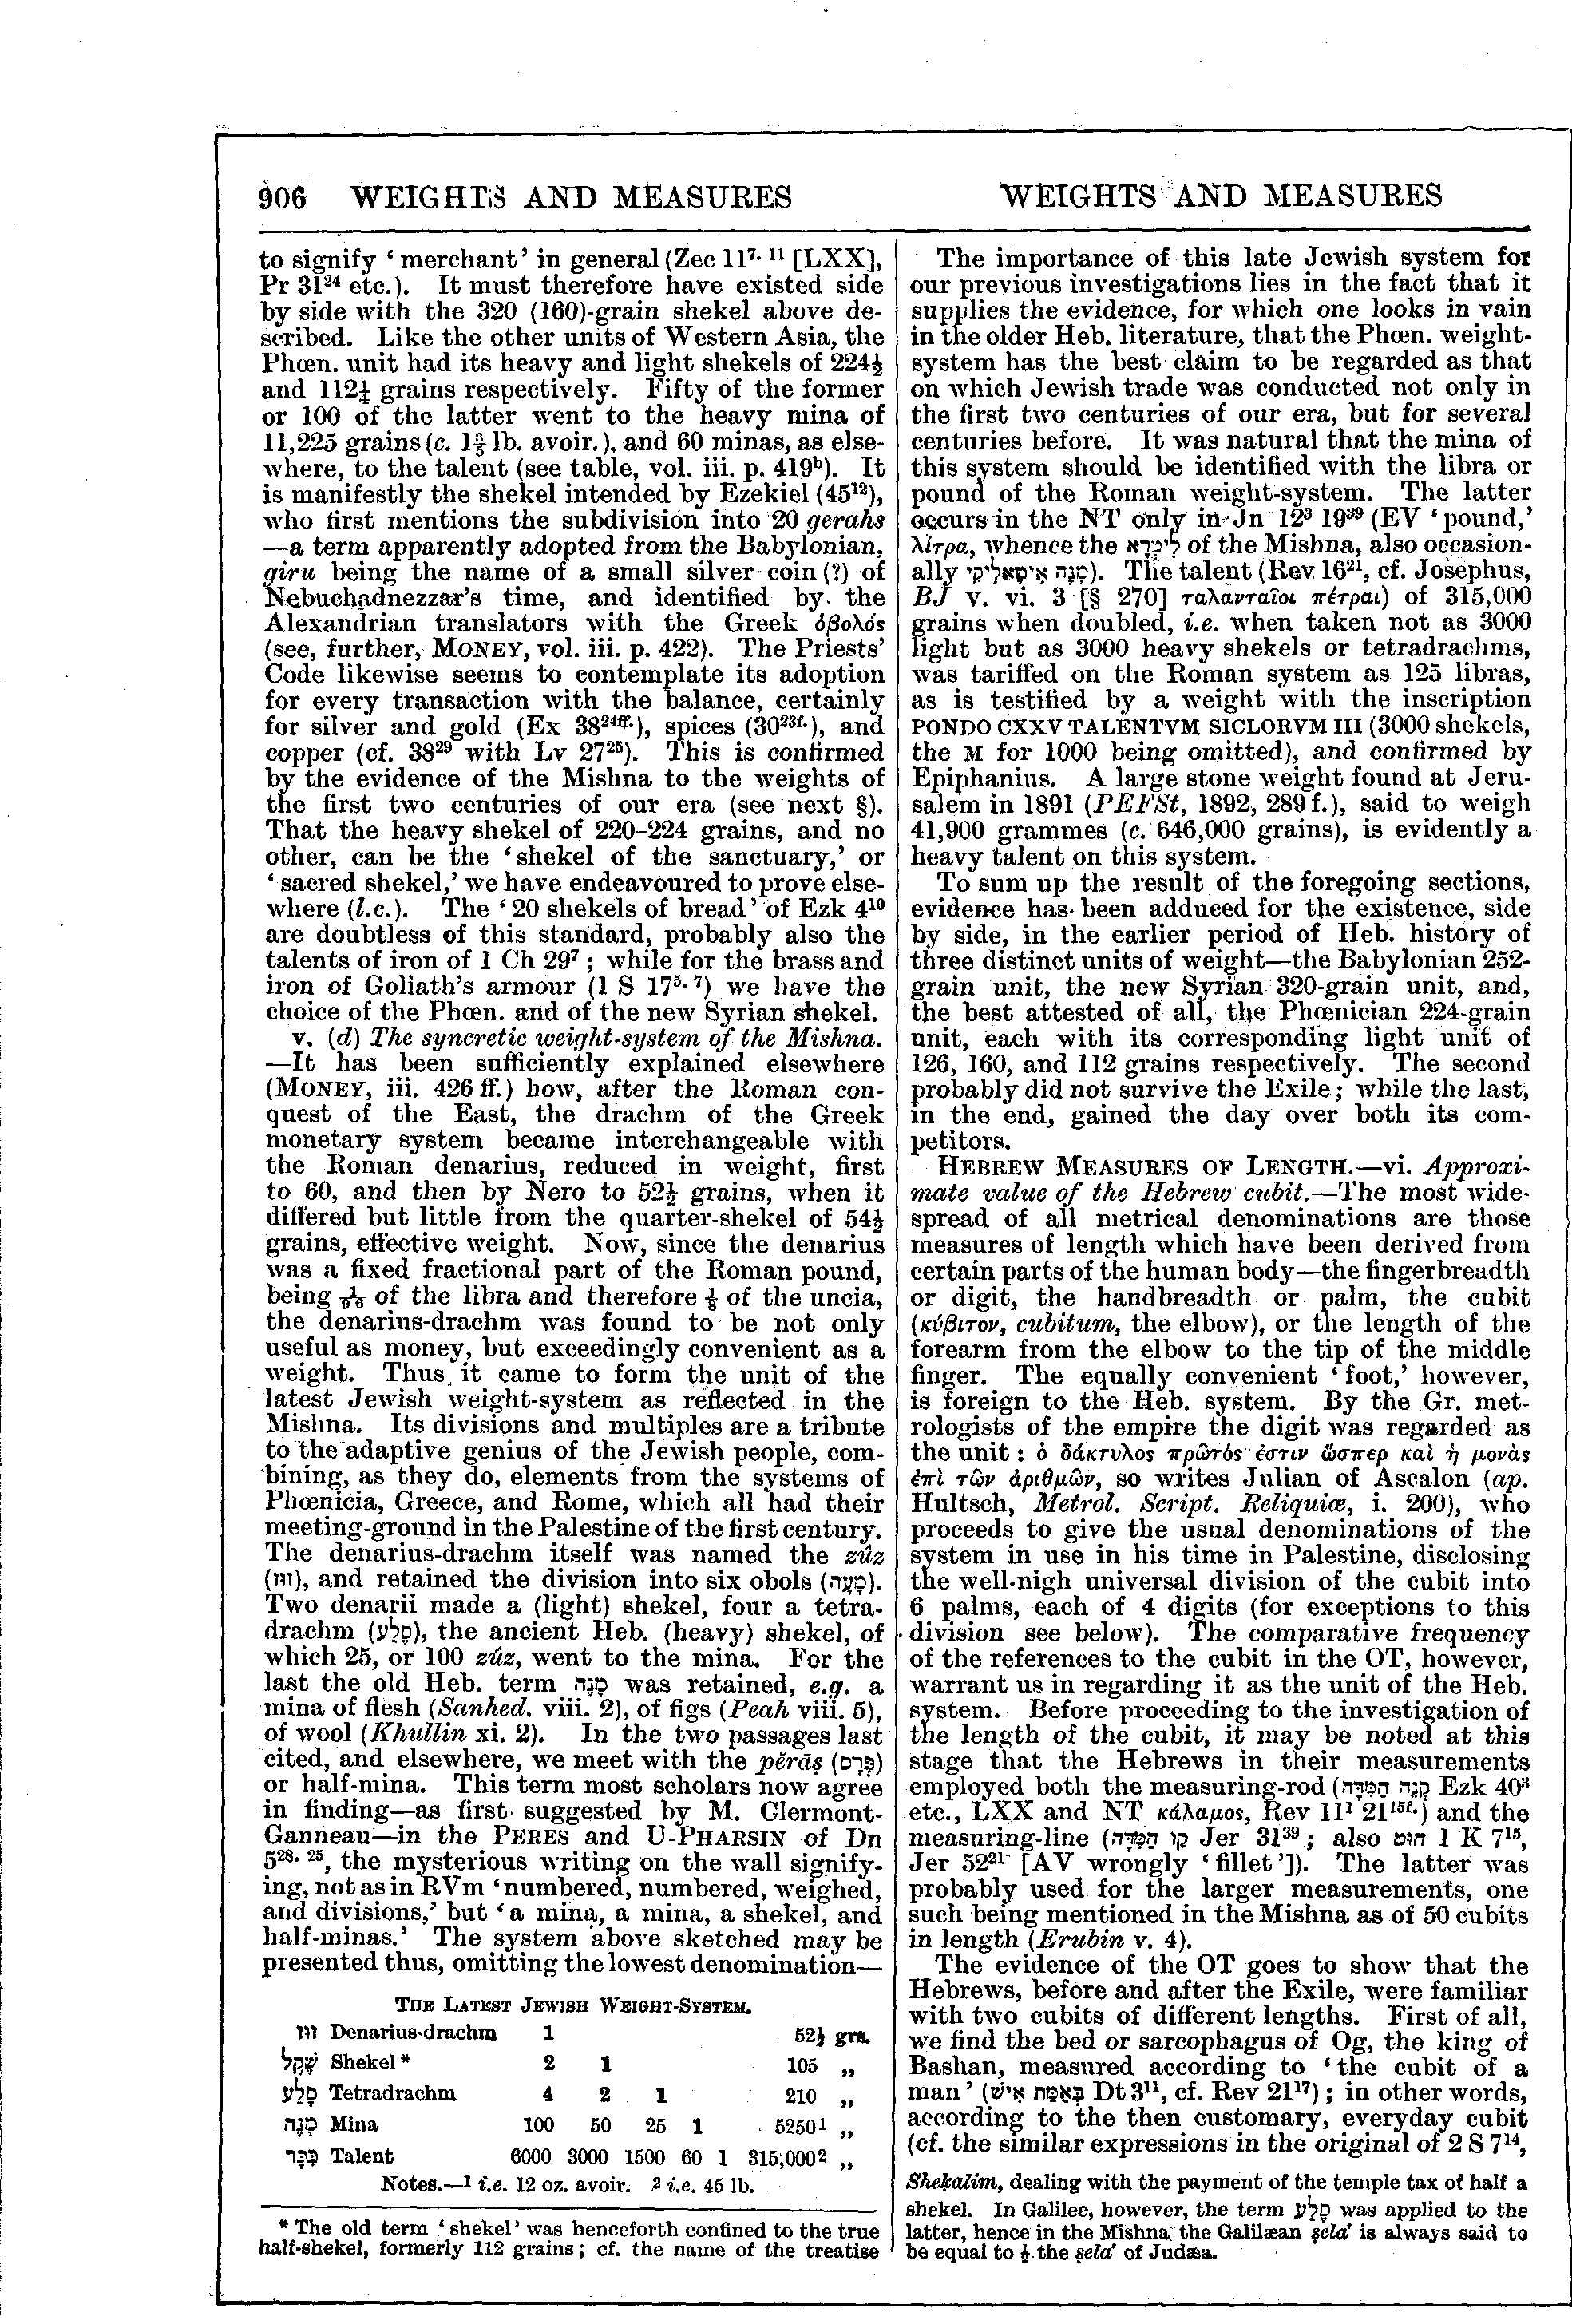 Image of page 906